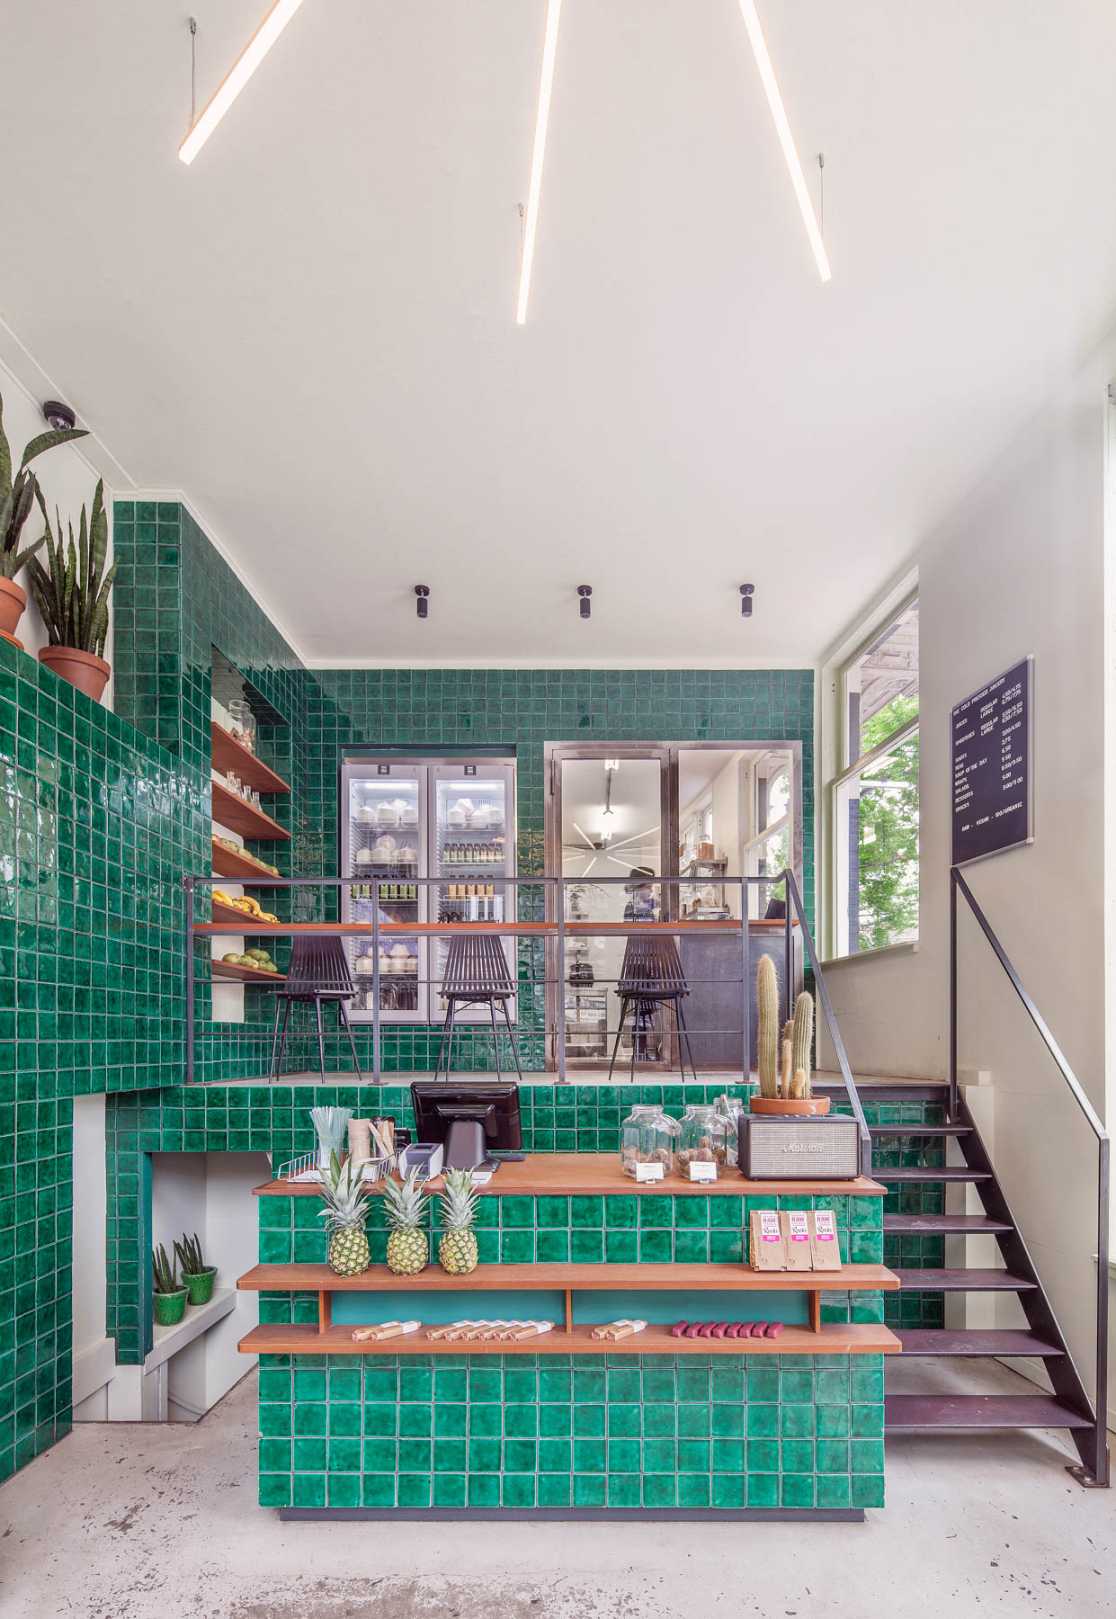 The Cold Pressed Juicery Amsterdam by Standard Studio